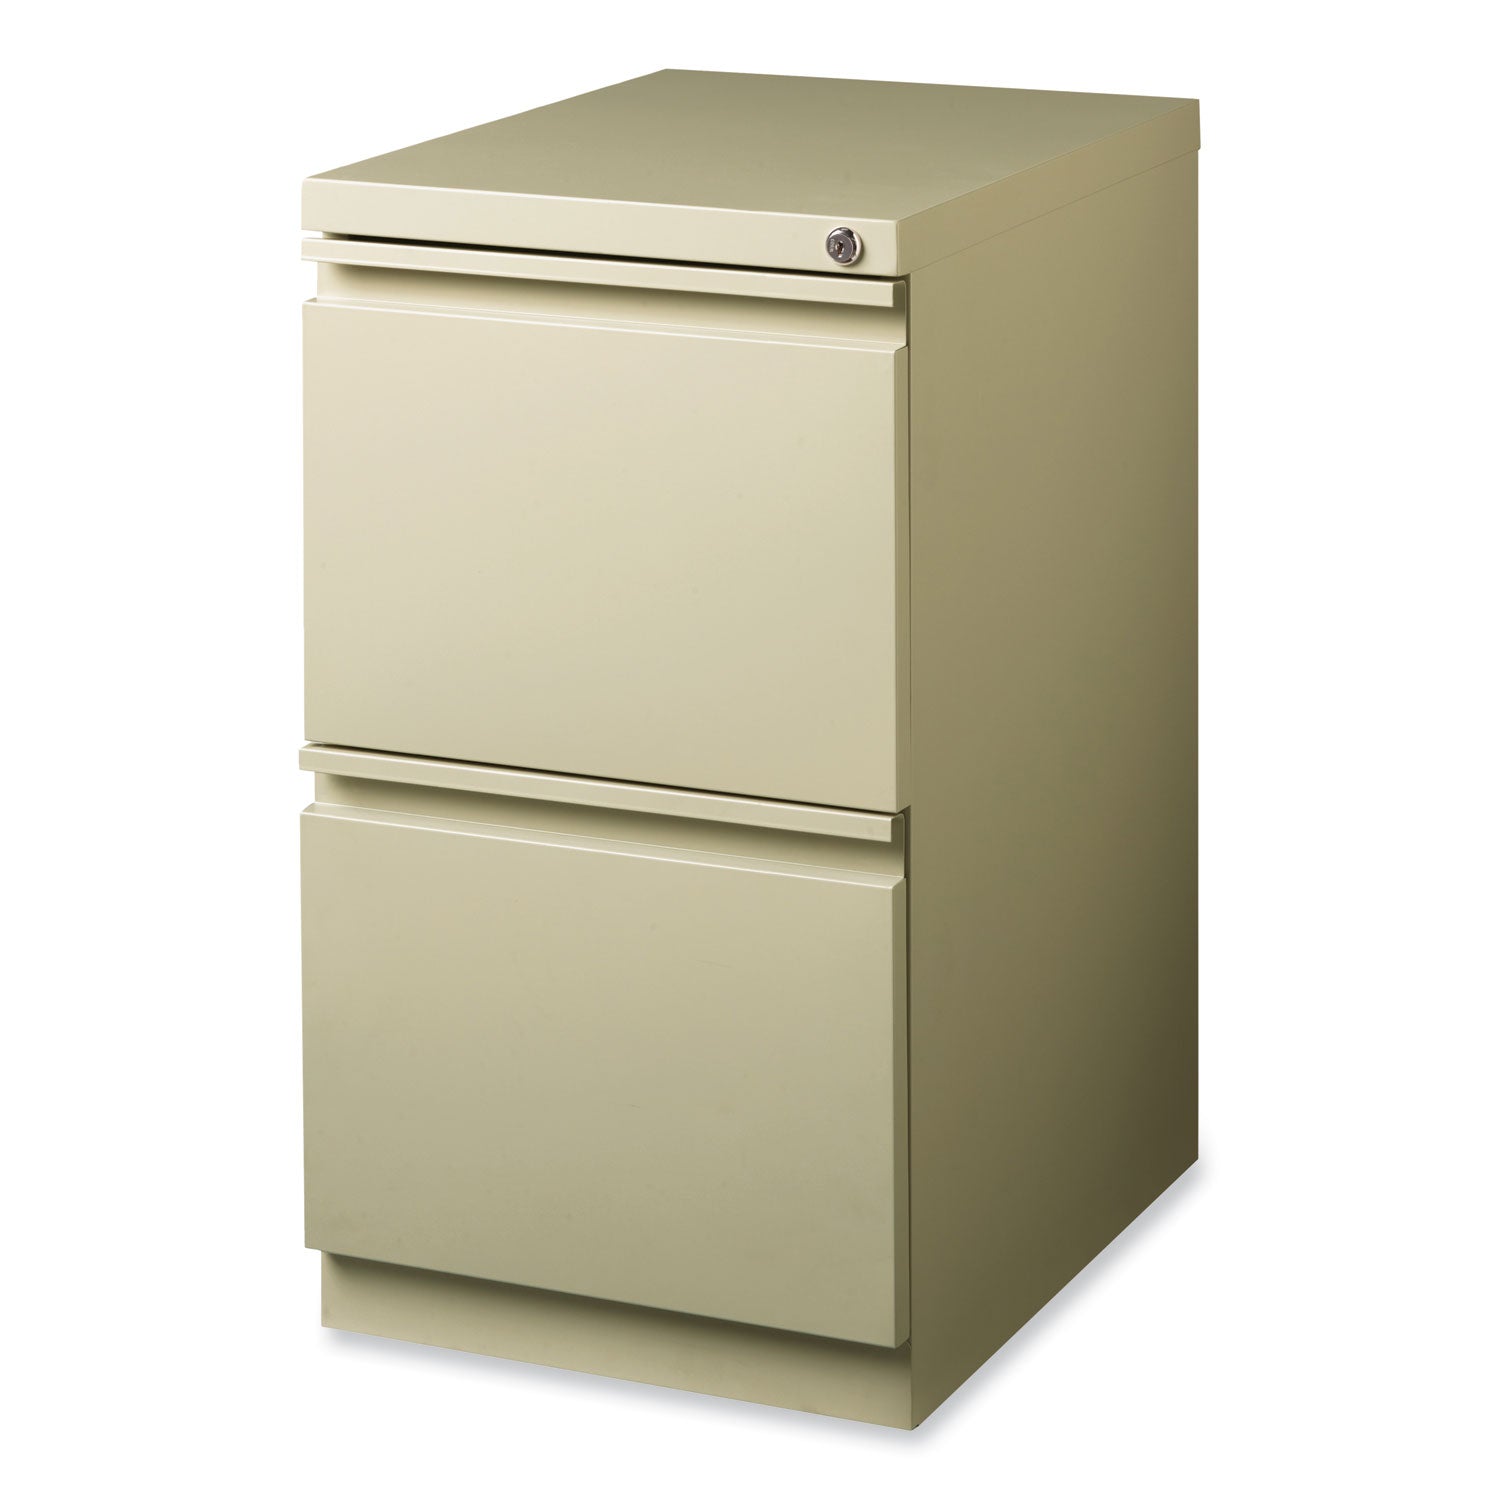 full-width-pull-20-deep-mobile-pedestal-file-2-drawer-file-file-letter-putty-15x1988x2775-ships-in-4-6-business-days_hid18577 - 4